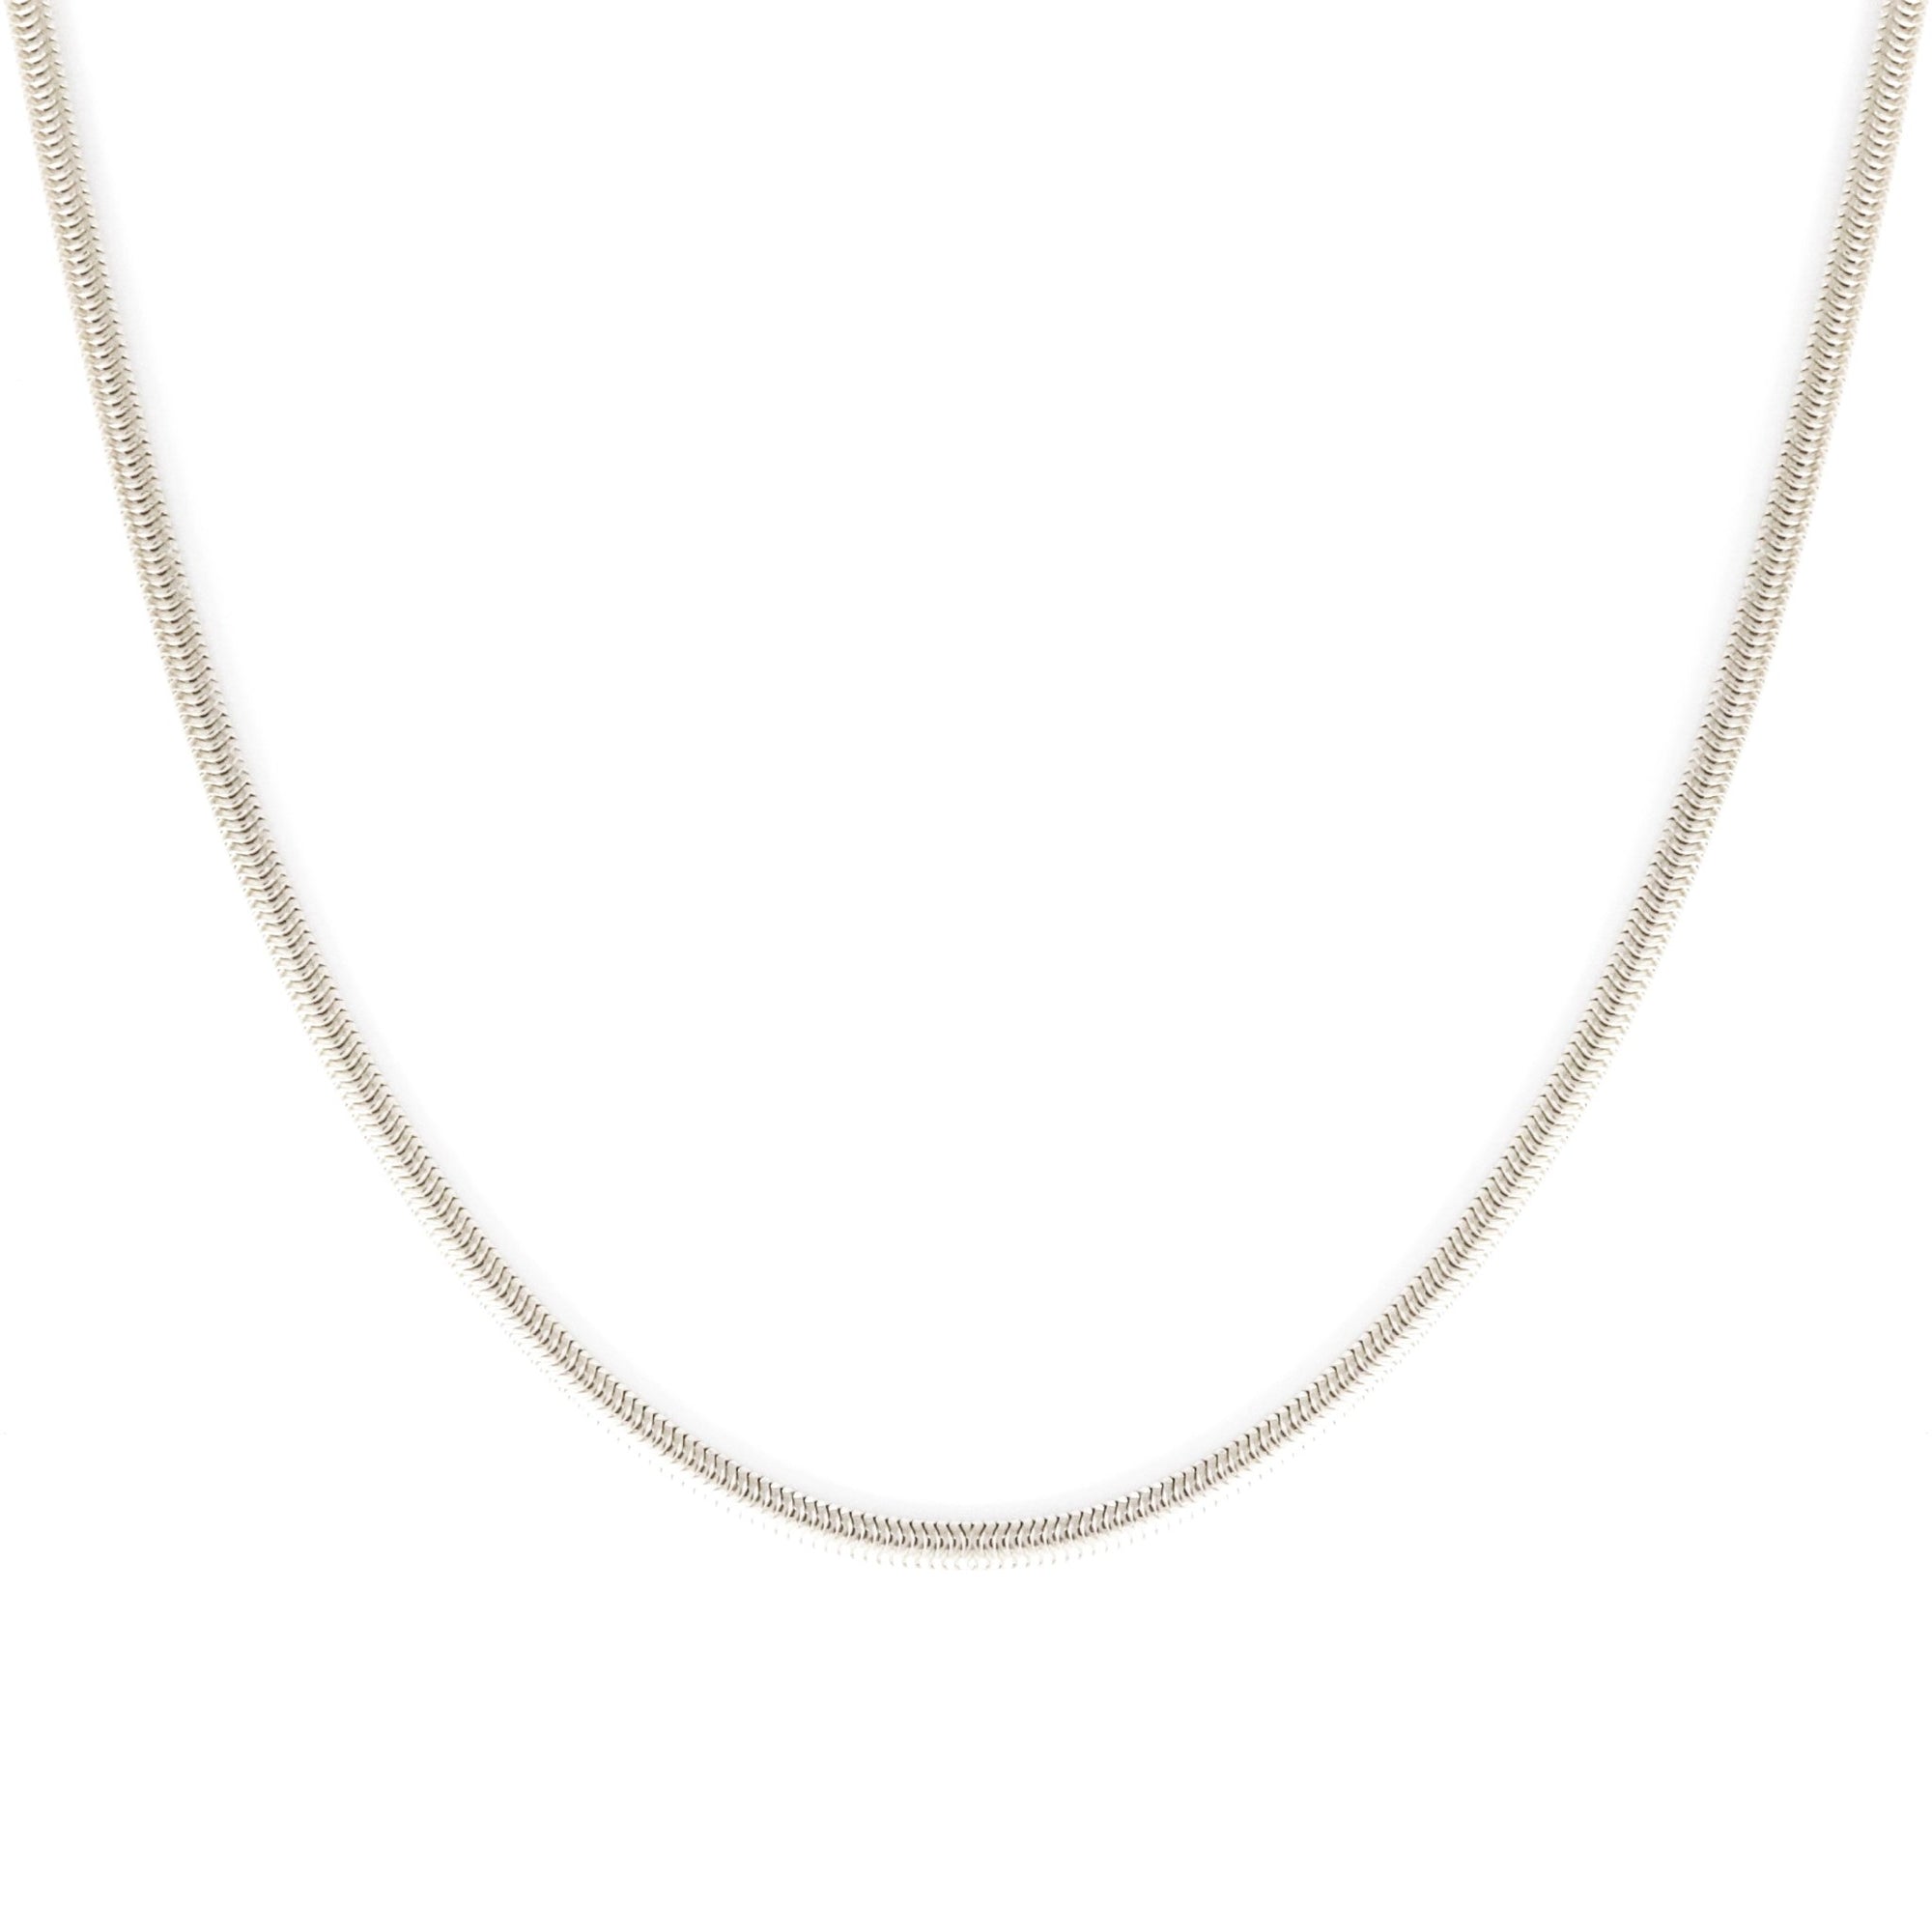 FEARLESS COBRA NECKLACE - SILVER - SO PRETTY CARA COTTER